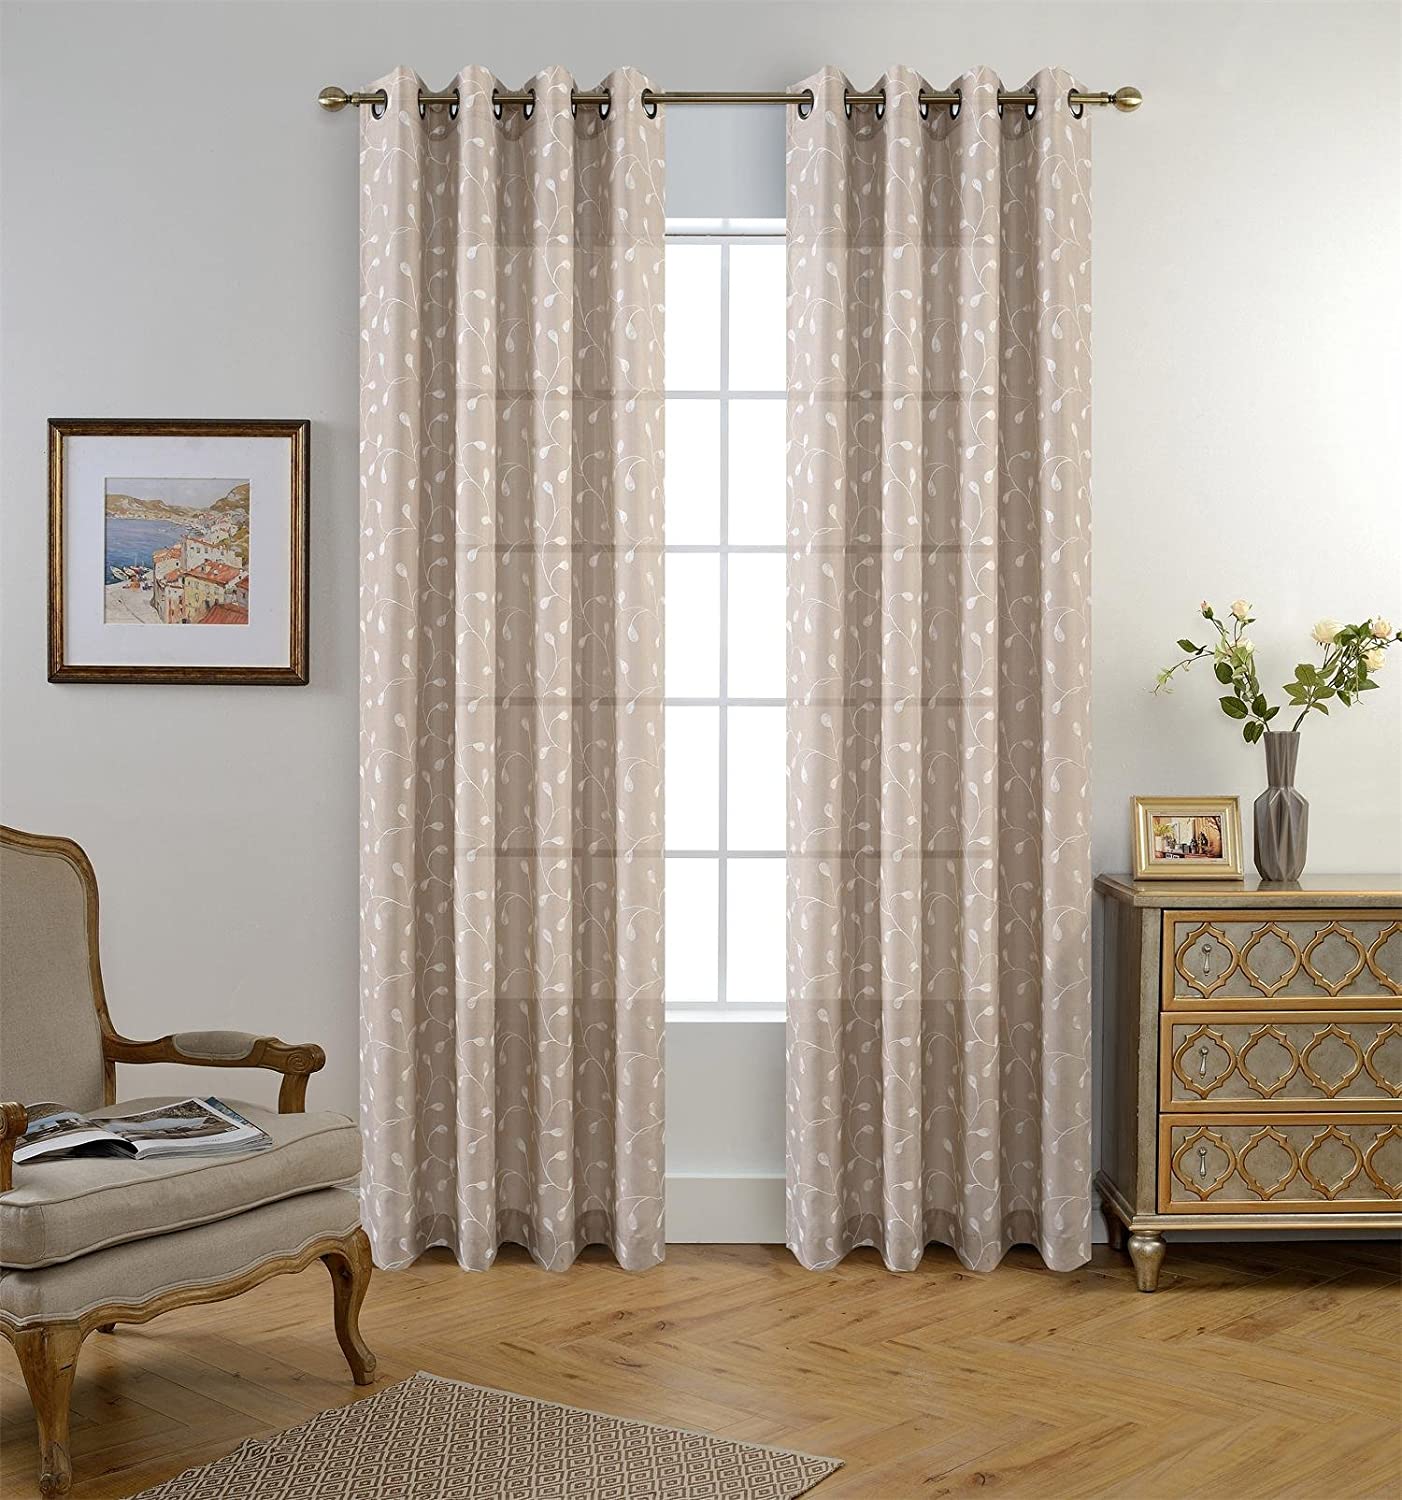 MIUCO Floral Embroidered Semi Sheer Curtains Faux Linen Grommet Window